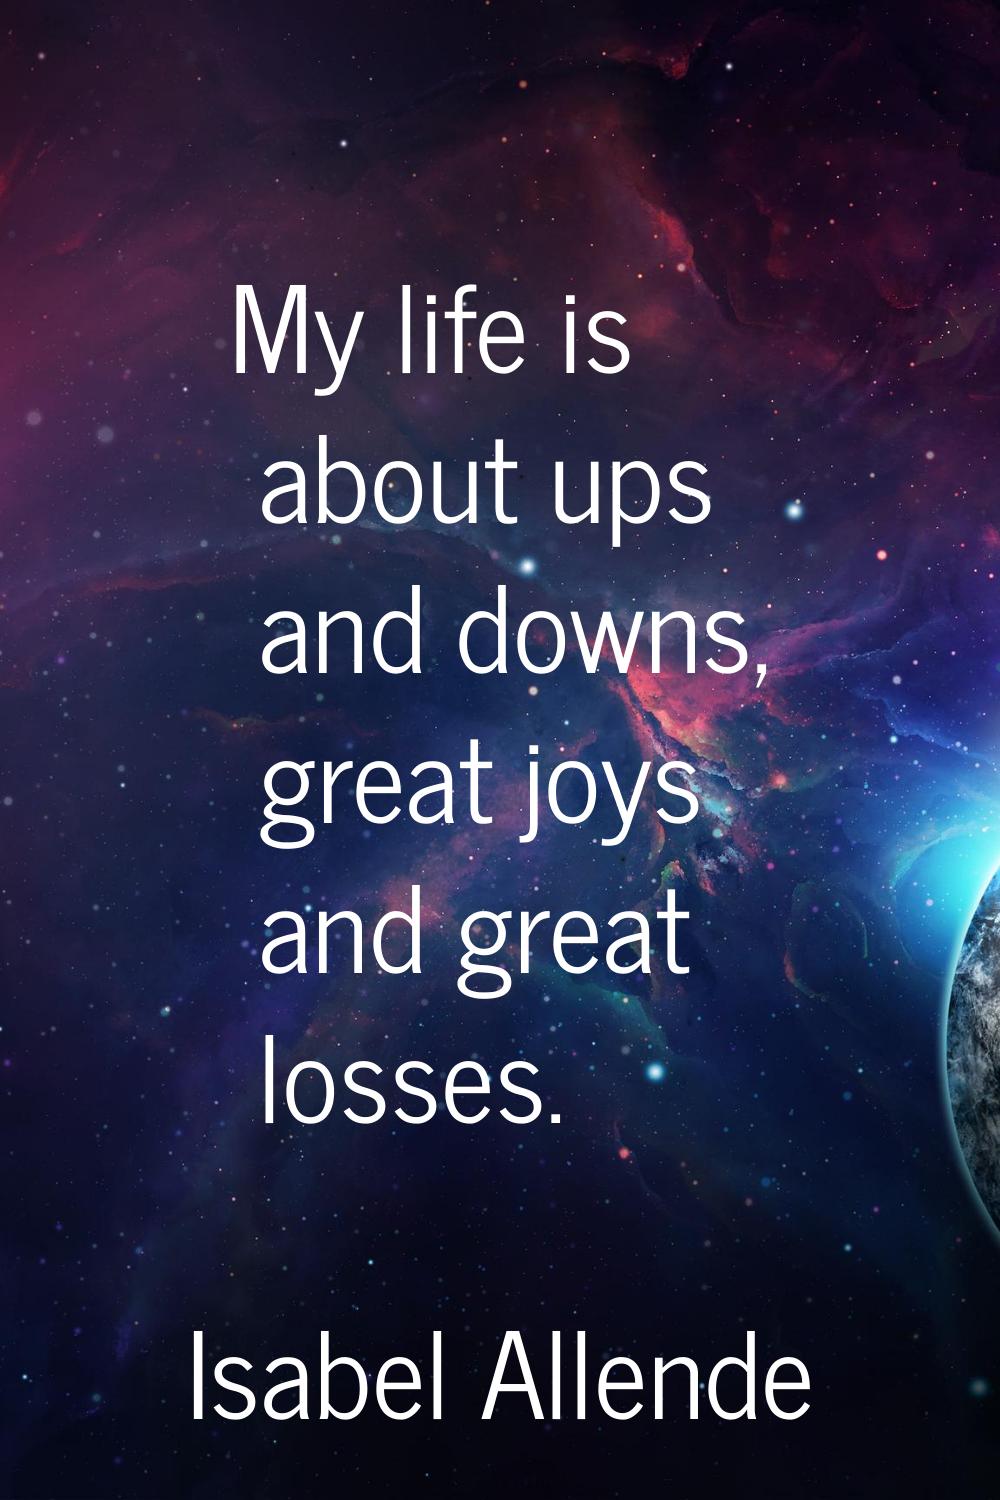 My life is about ups and downs, great joys and great losses.